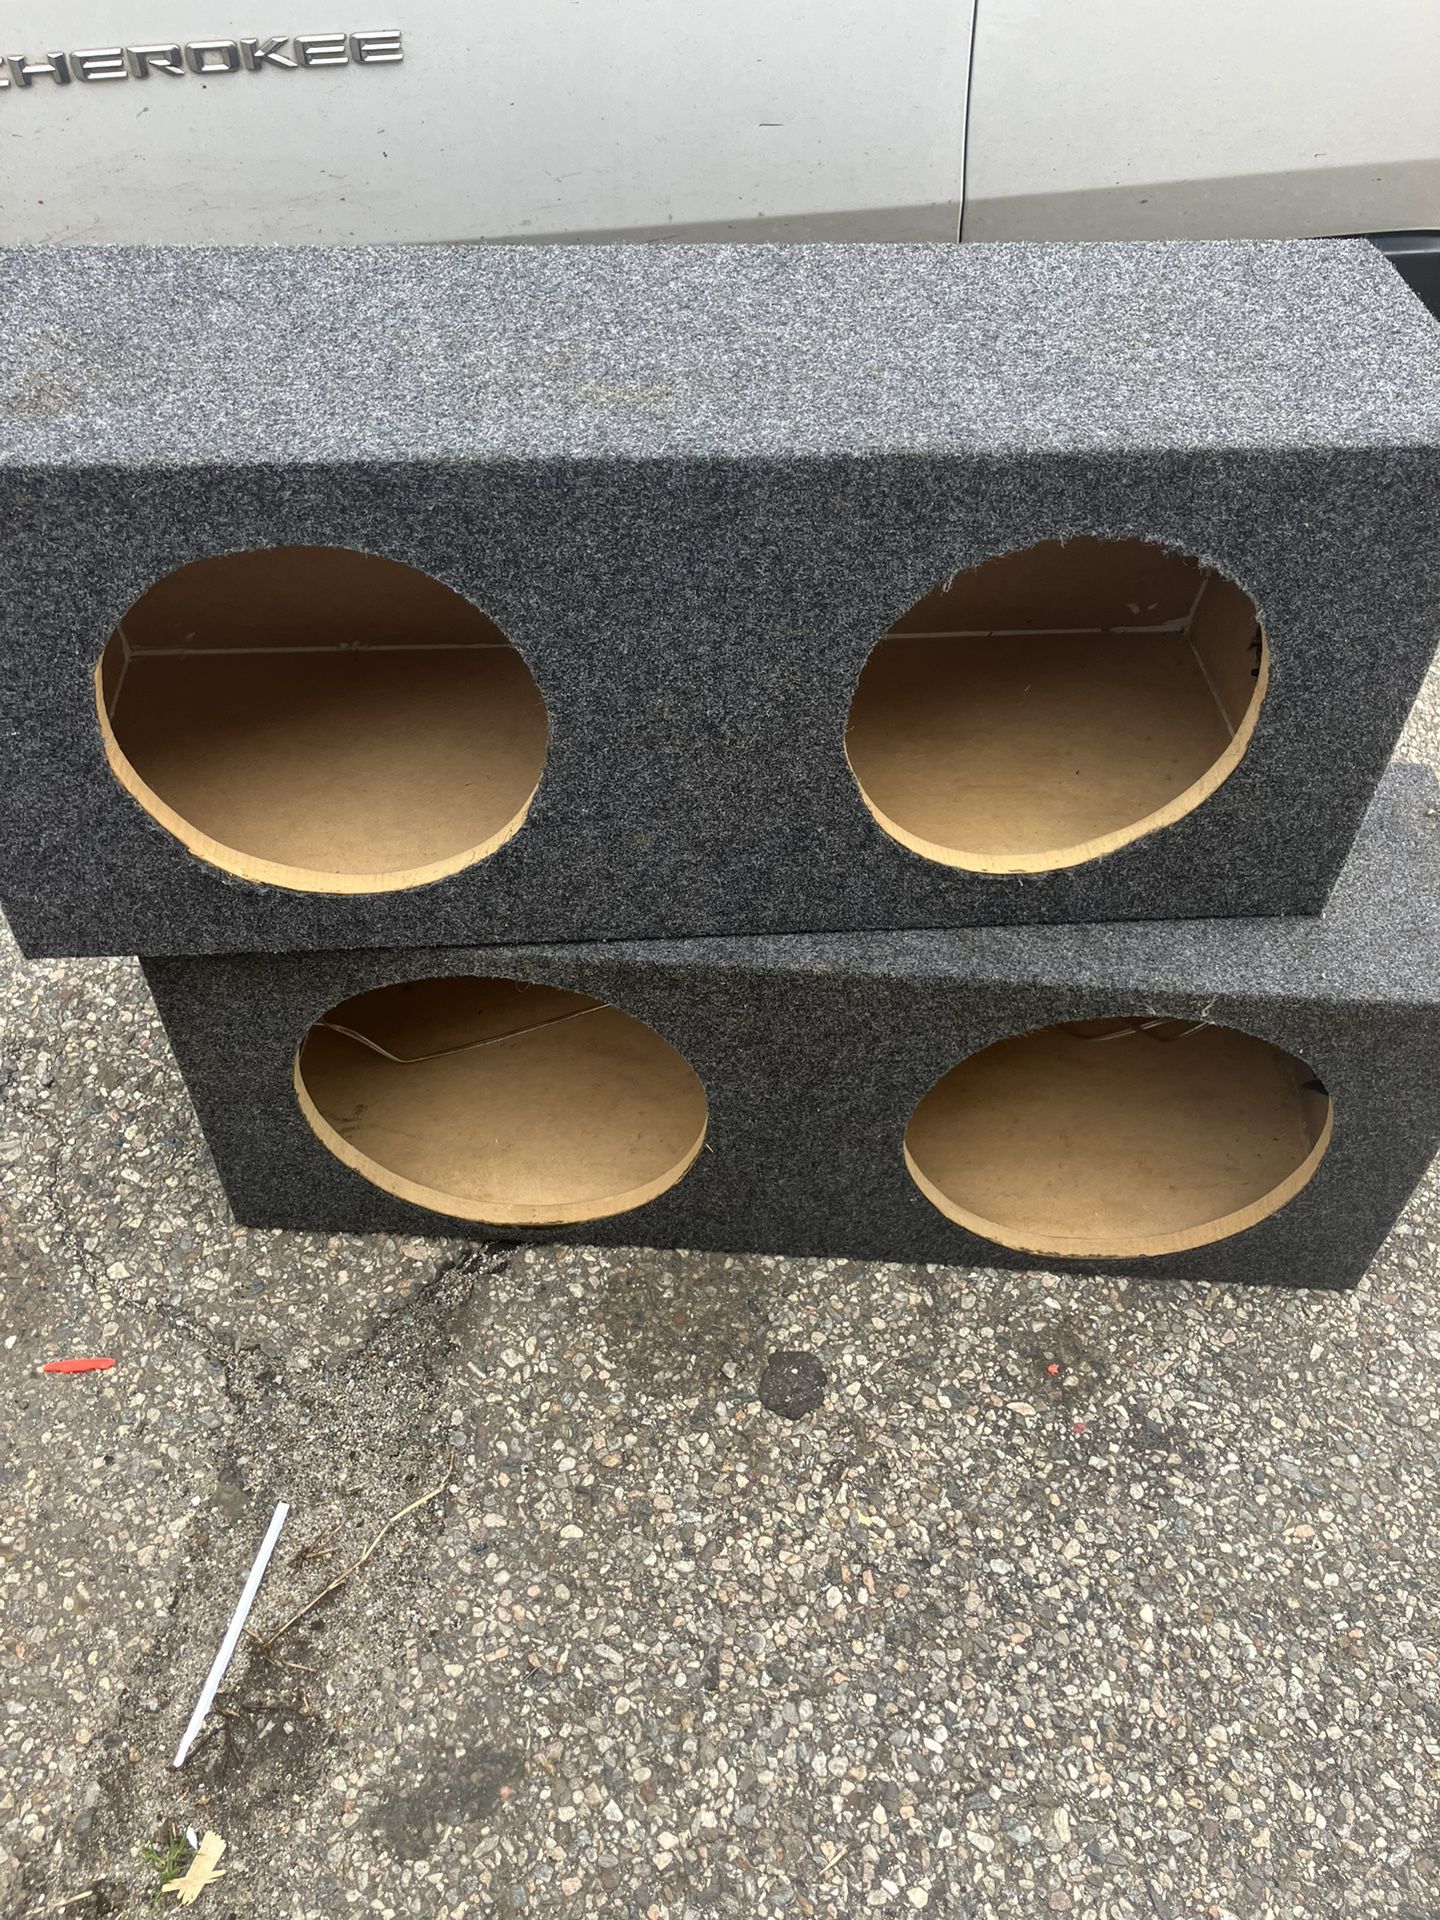 Subwoofer Boxes 10 Inch And 12 Inch $25